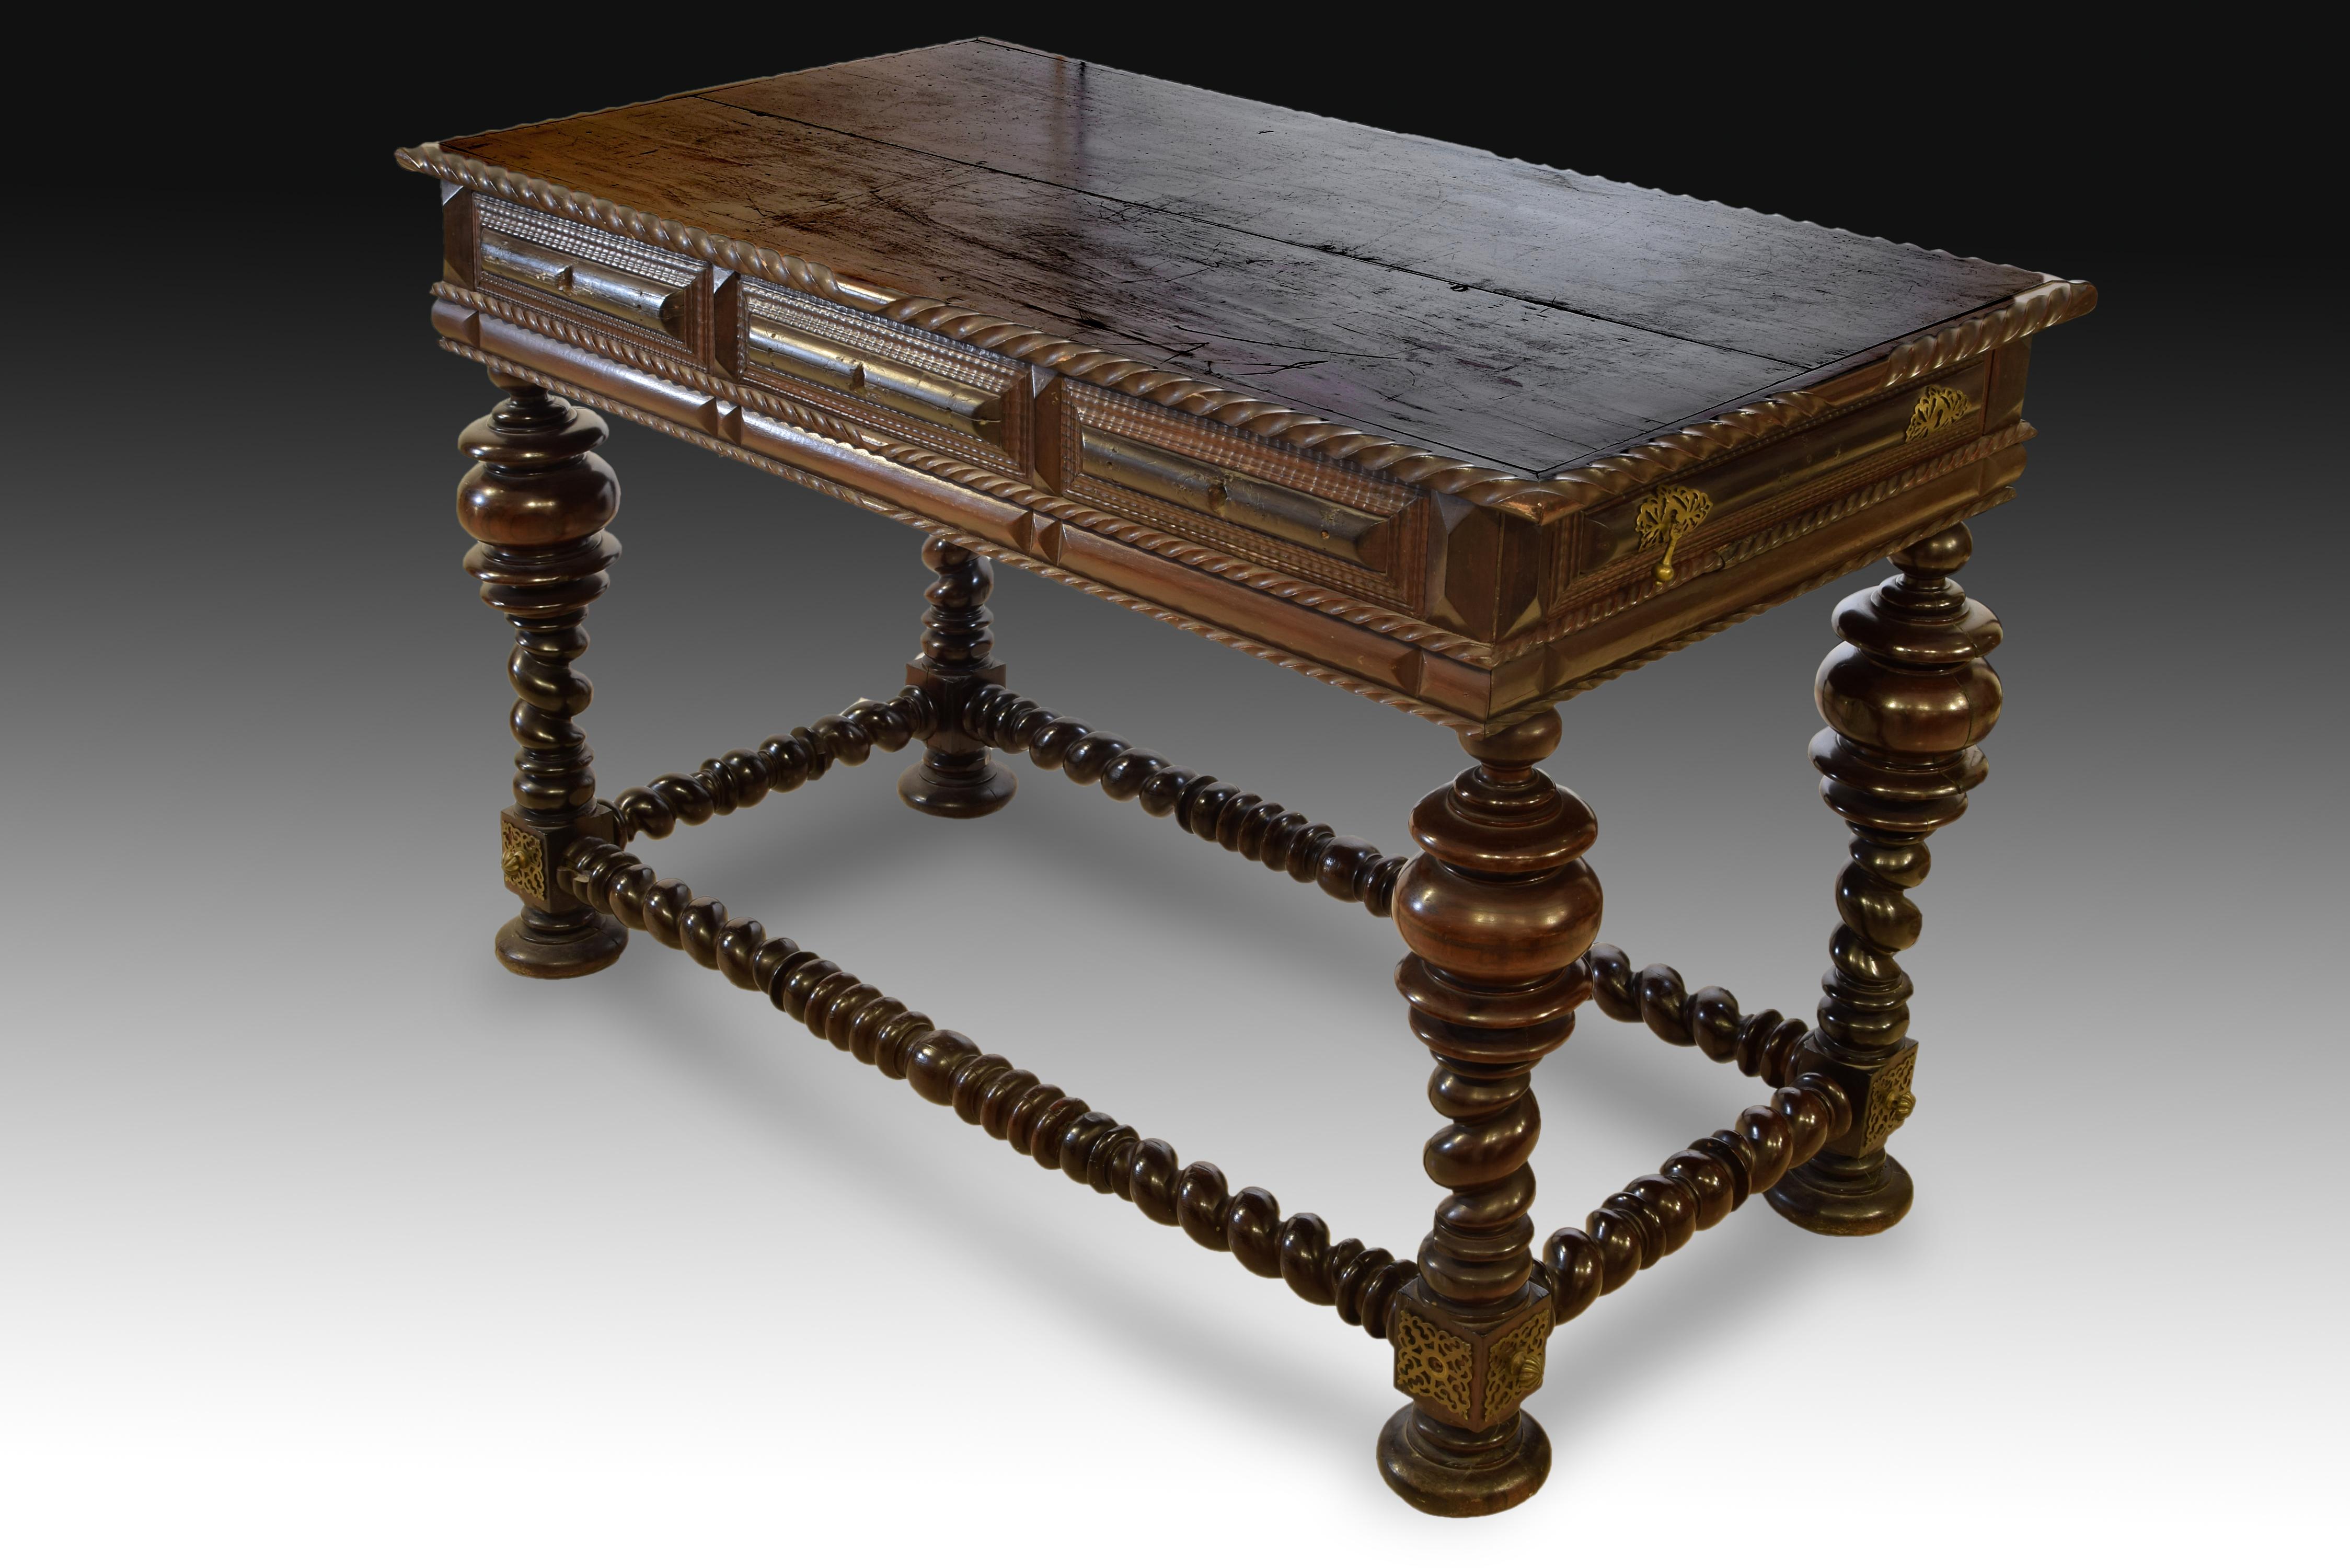 Neoclassical Table, Palosanto 'Rose Wood or Holy Wood', Portuguese School, 18th and 19th C